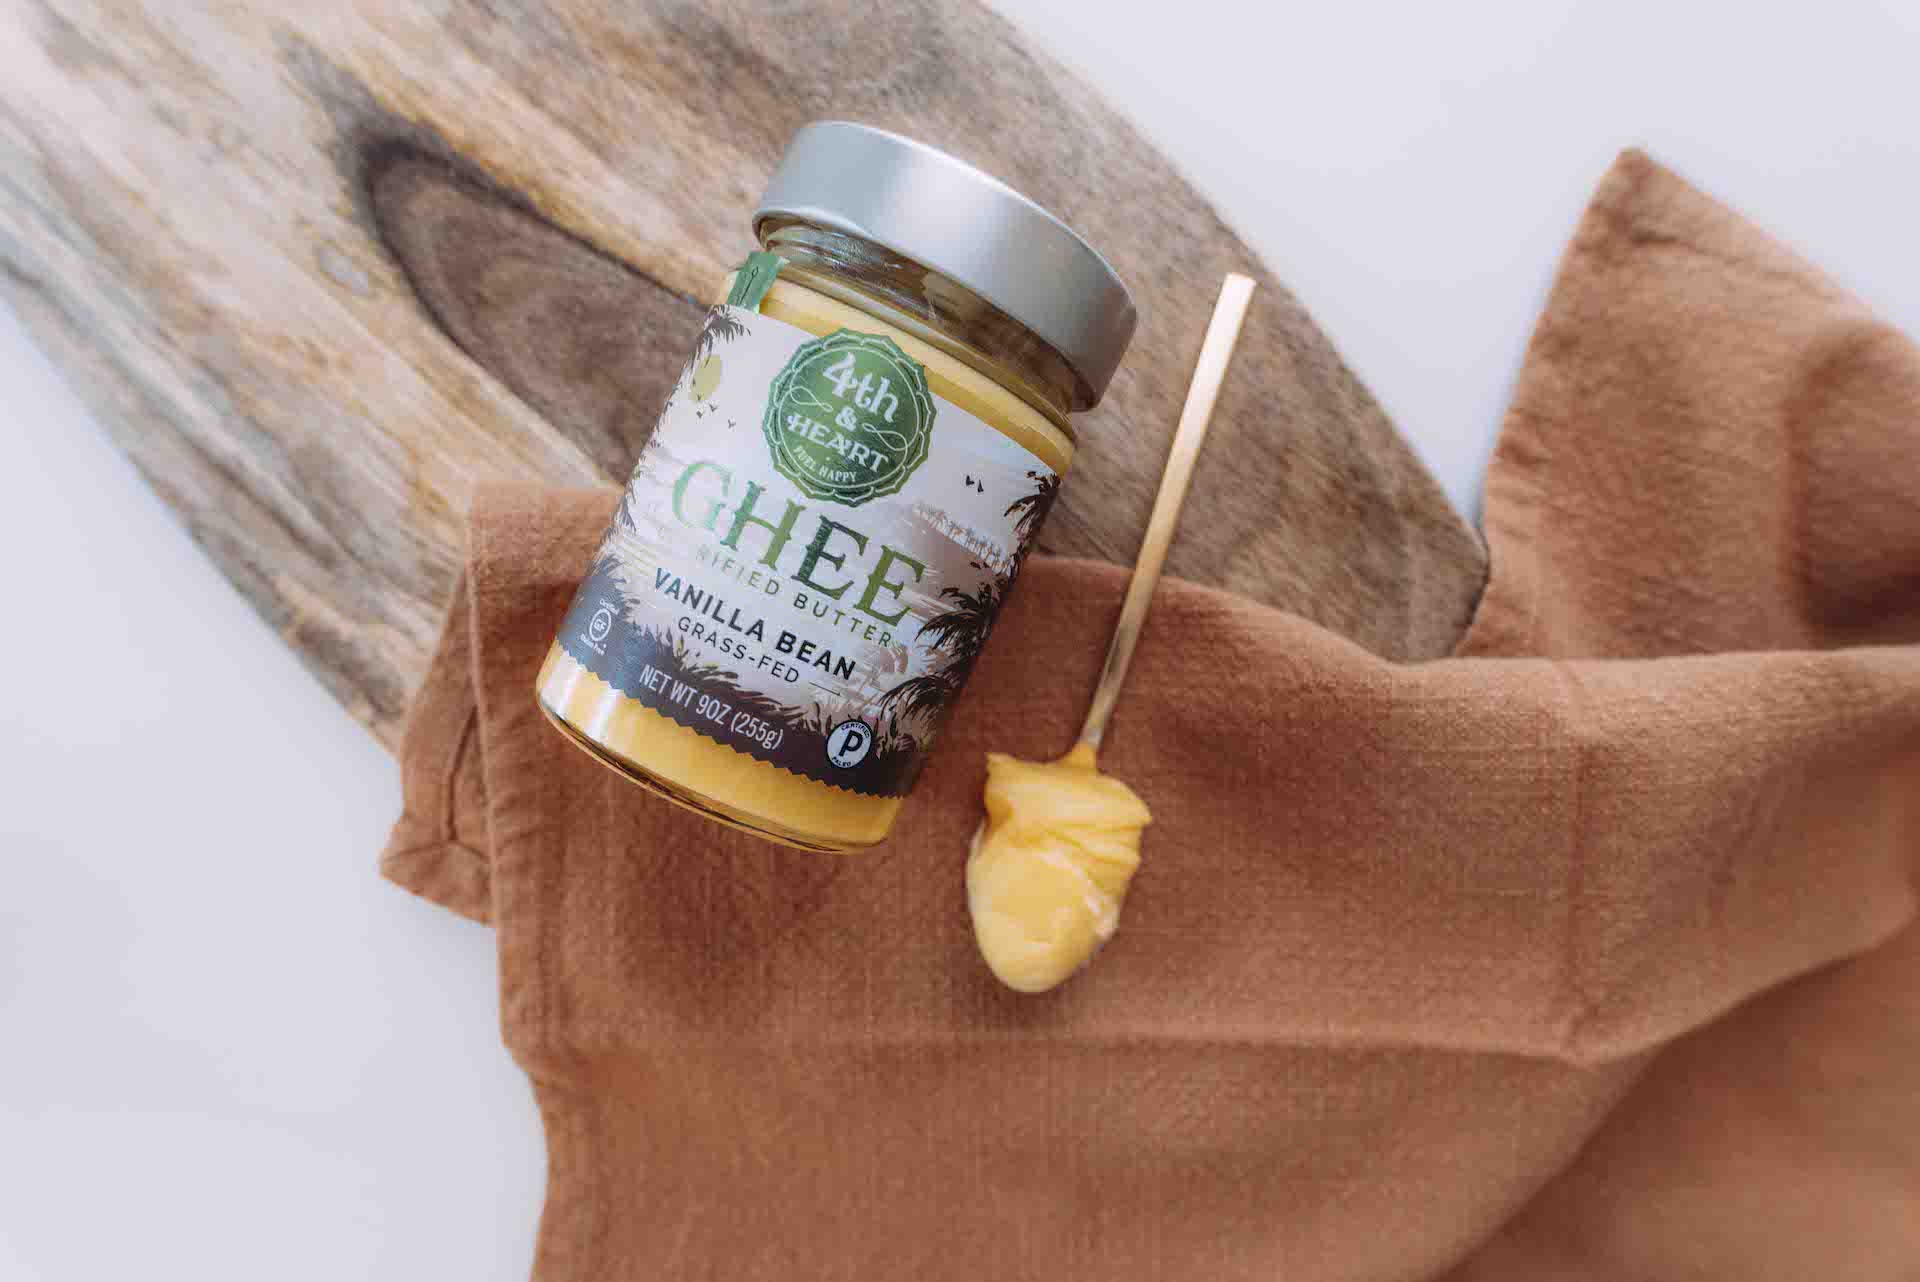 Food Facts: Ghee Butter - Girls Living Well; Click to read about Ghee butter on Girls Living Well! Ghee has been used for thousands of years in Ayurvedic healing practices and in Indian, Middle Eastern and Southeast Asian cuisines. It’s a nutritious, clarified, grass-fed butter that’s been heated up and stripped of its lactose and casein proteins. Ghee is anti-inflammatory. Ghee benefits skin health. Ghee benefits bulletproof coffee. Uses for ghee recipes. Benefits of ghee for hair. Clarified butter benefits.